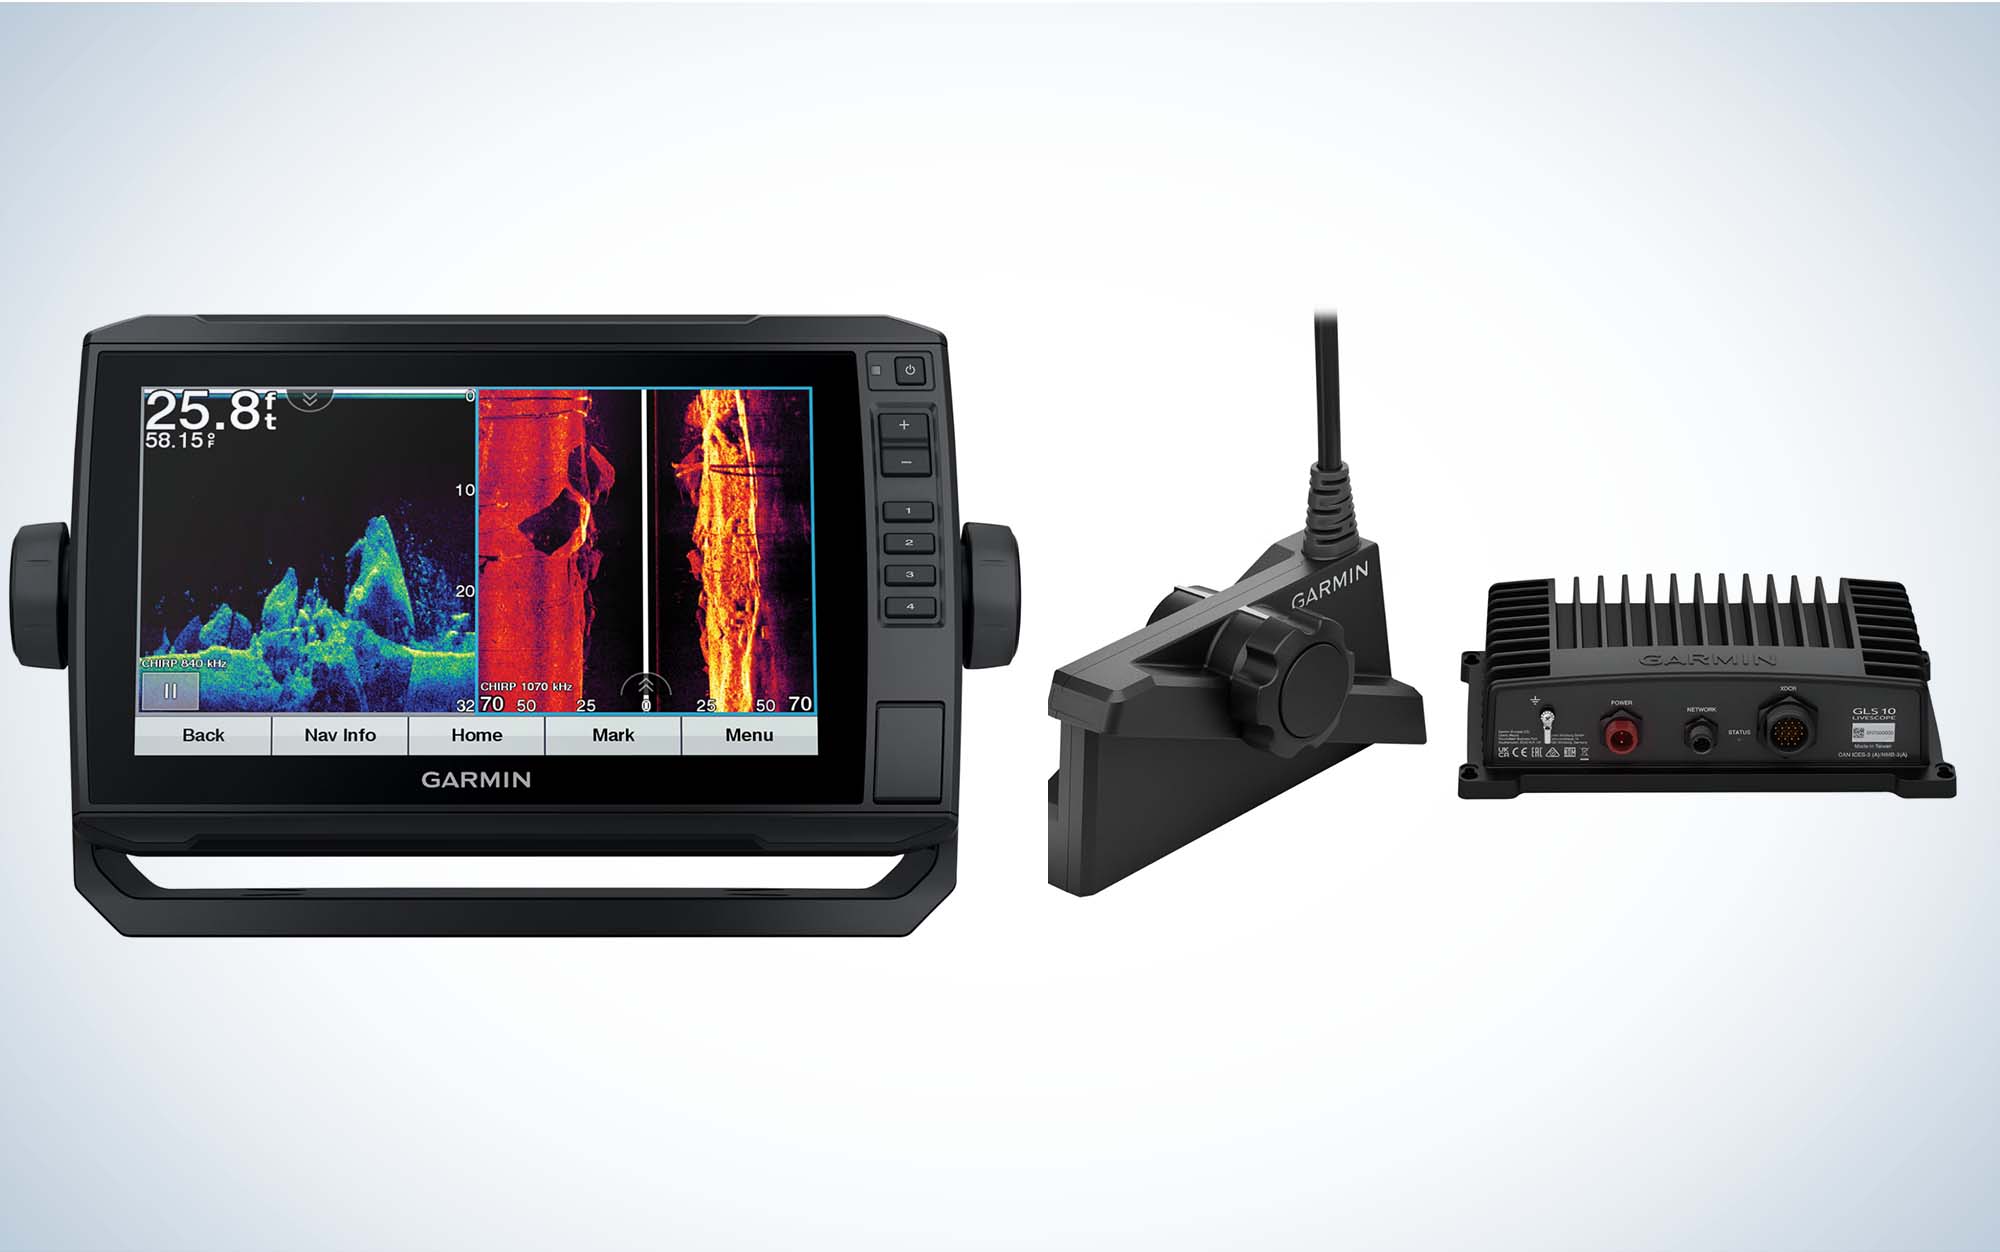 Garmin Echomap and Livescope are one of the best fish finders